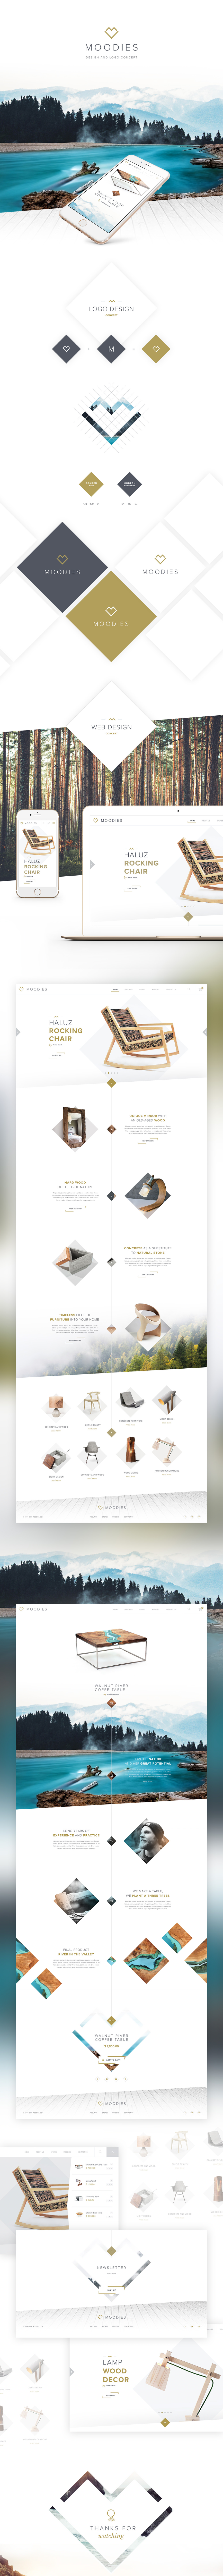 mood furniture Unique wood Nature TIMBER Tree  river Webdesign logo corporate clean Ecommerce mountains